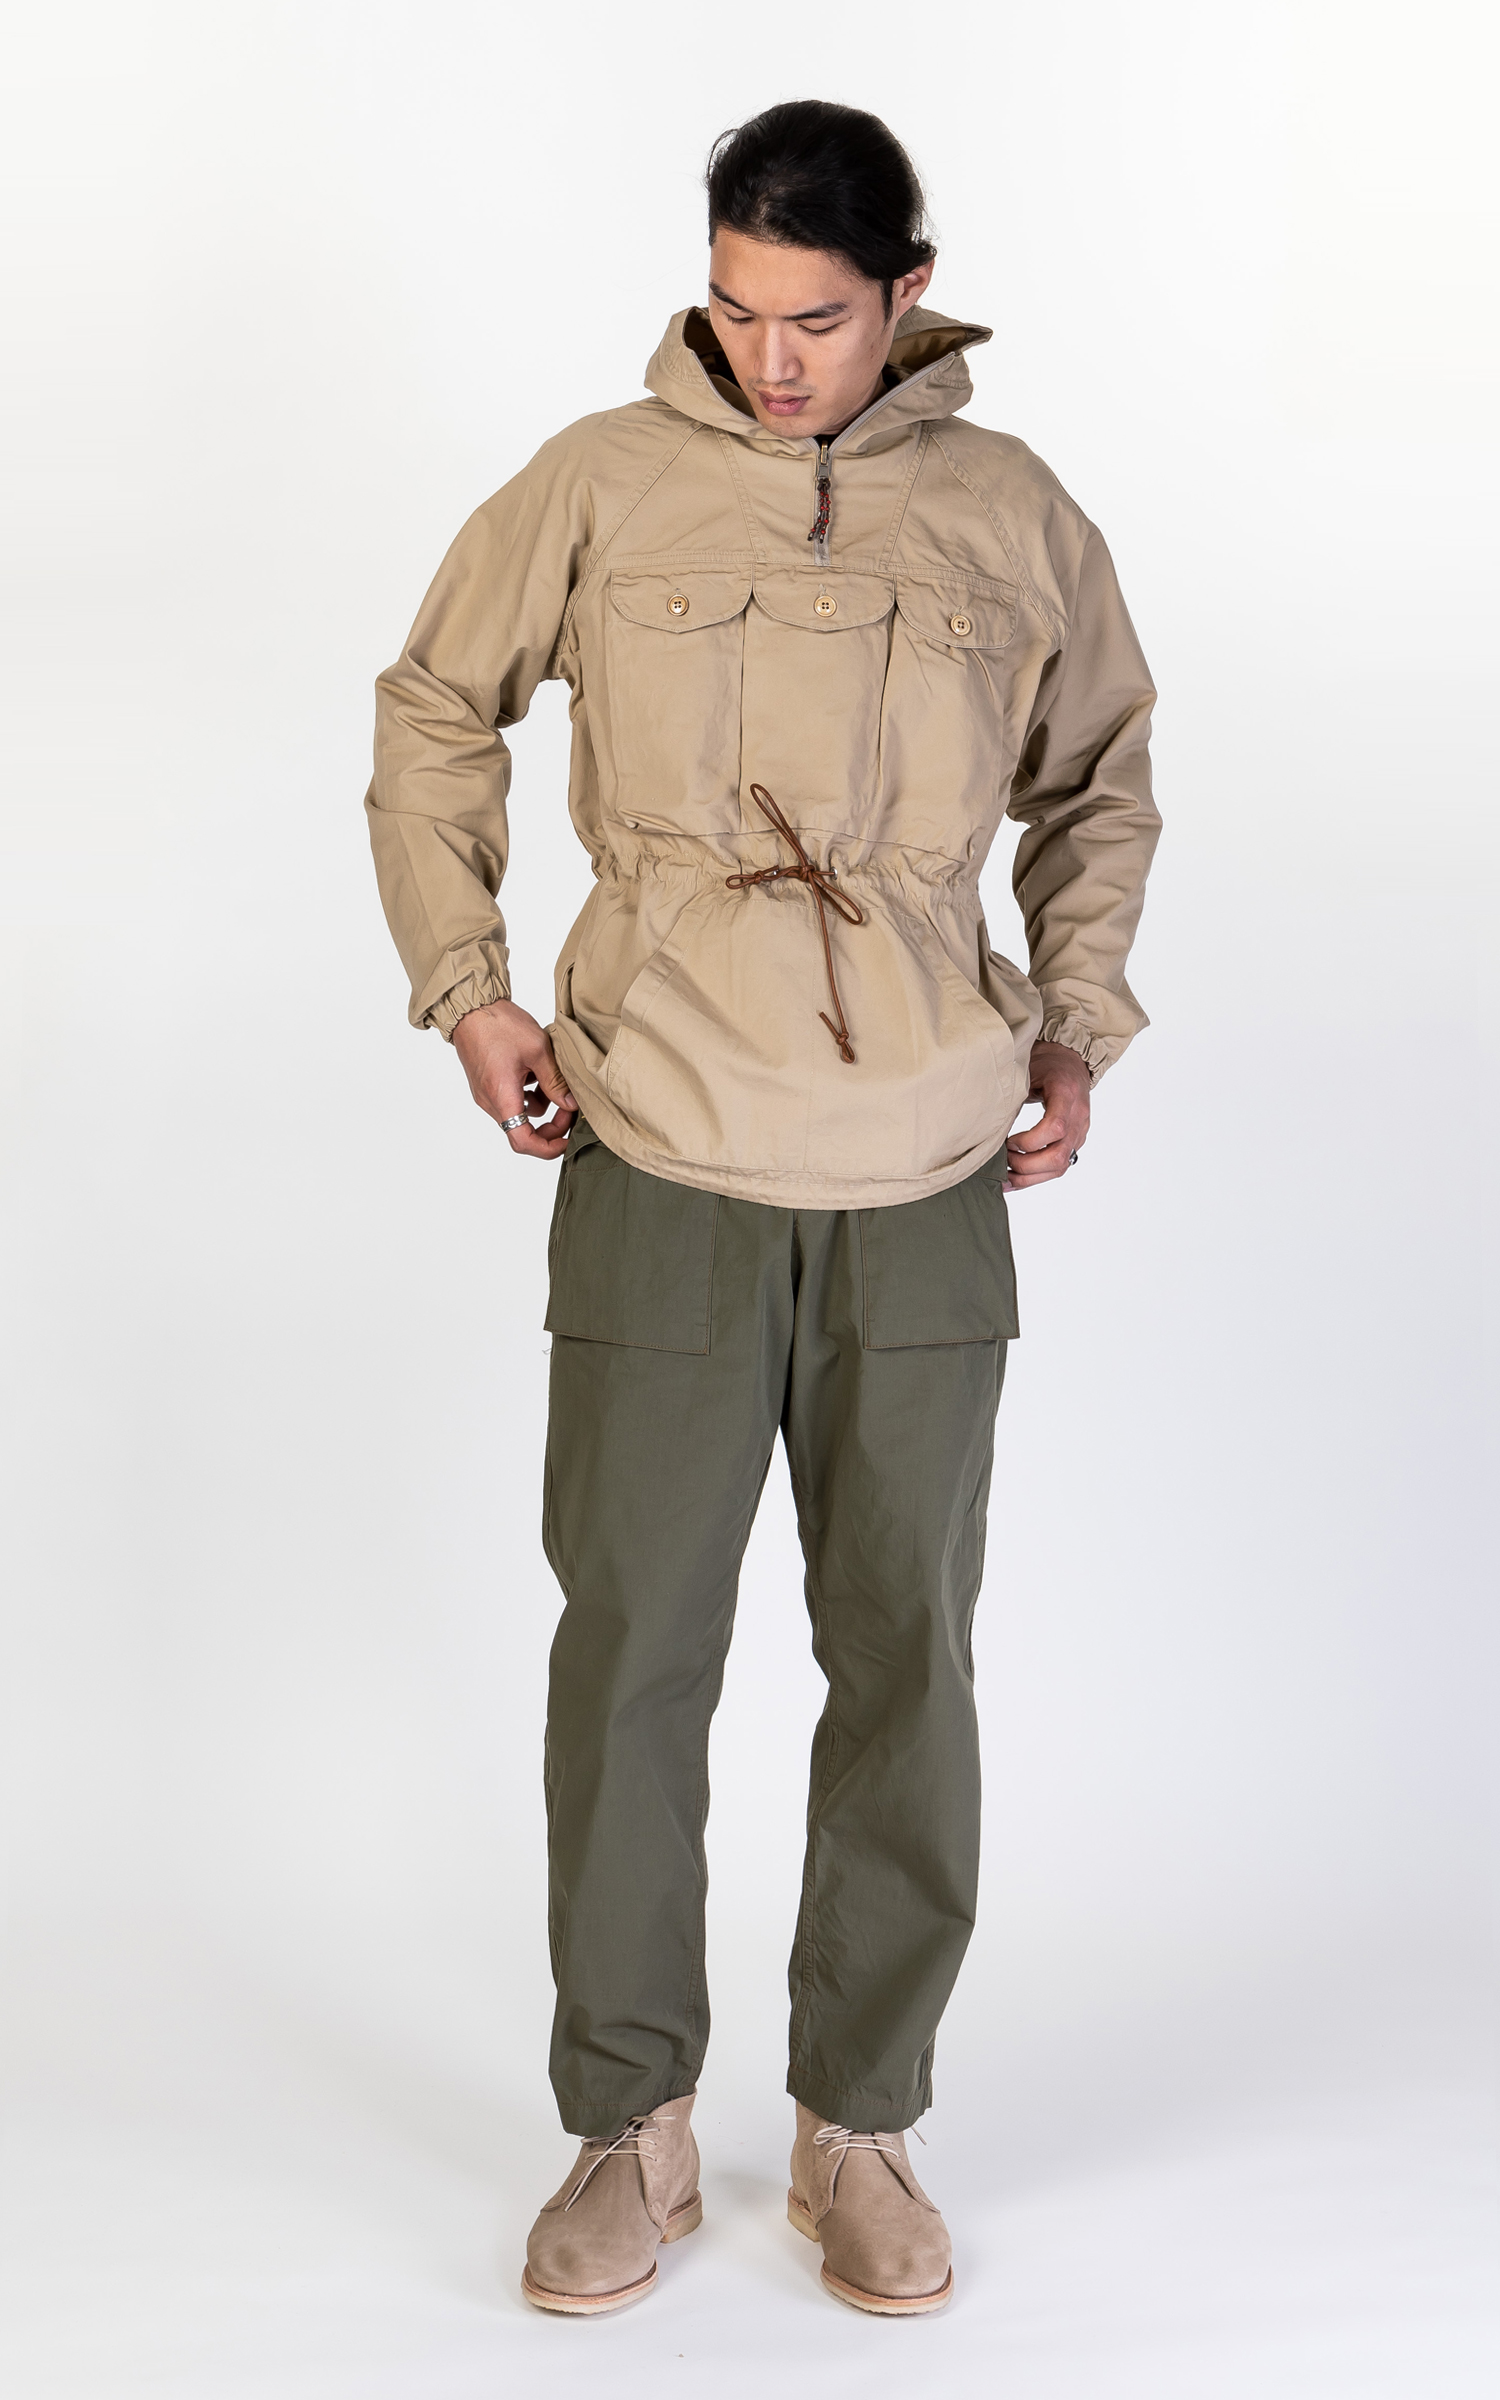 Gypsy & Sons Ventile Cotton Anorak Jacket Beige | Cultizm